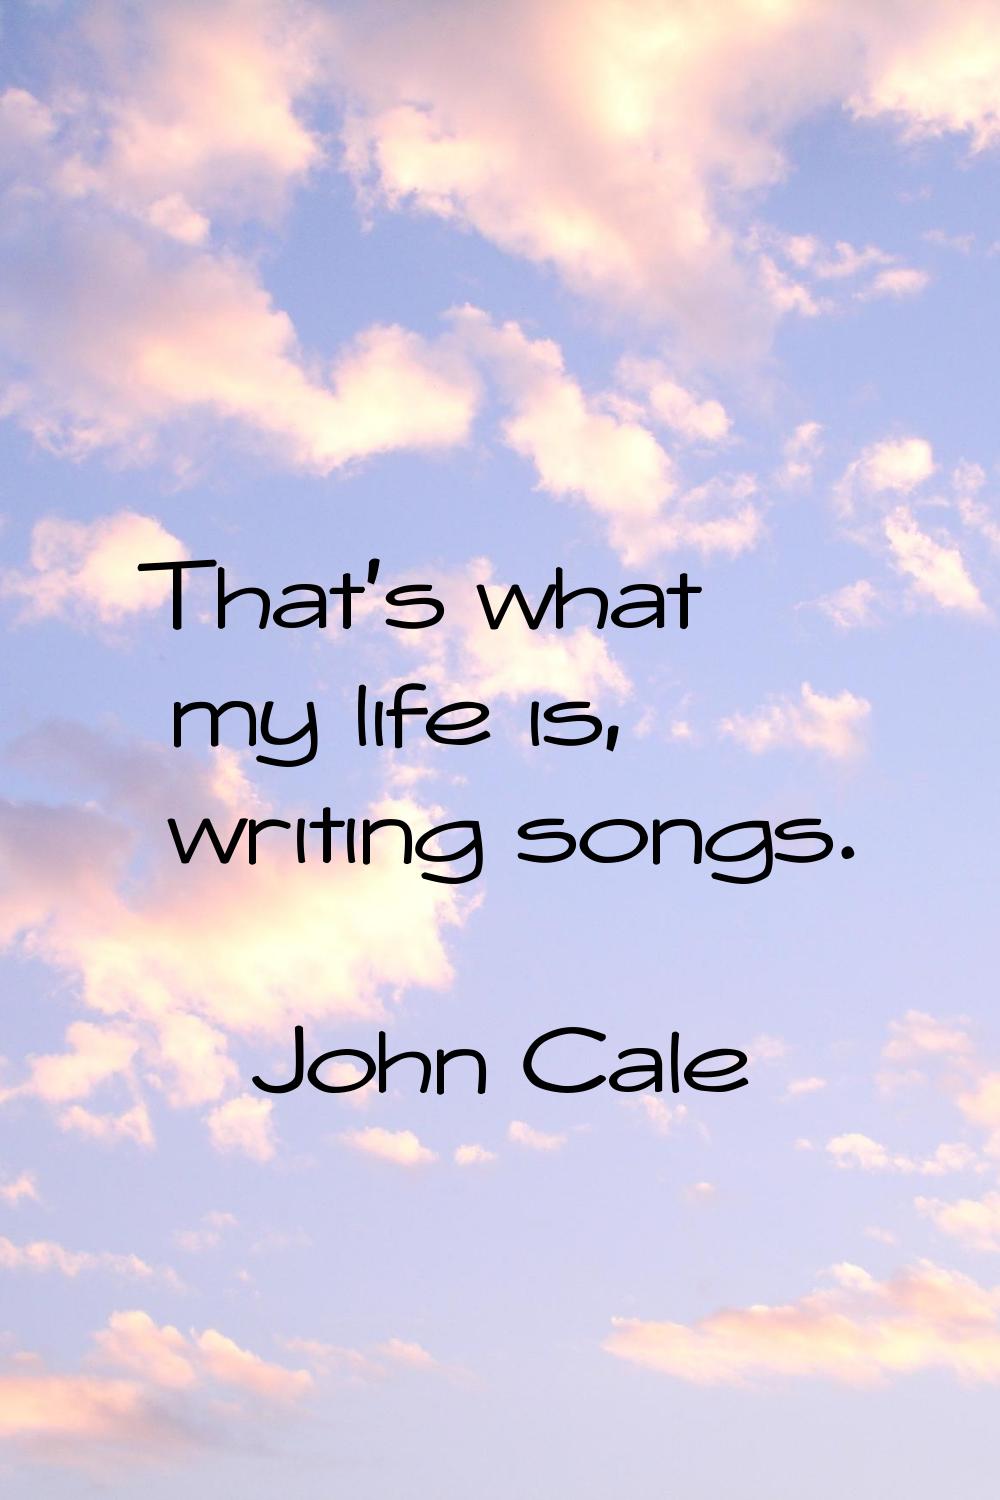 That's what my life is, writing songs.